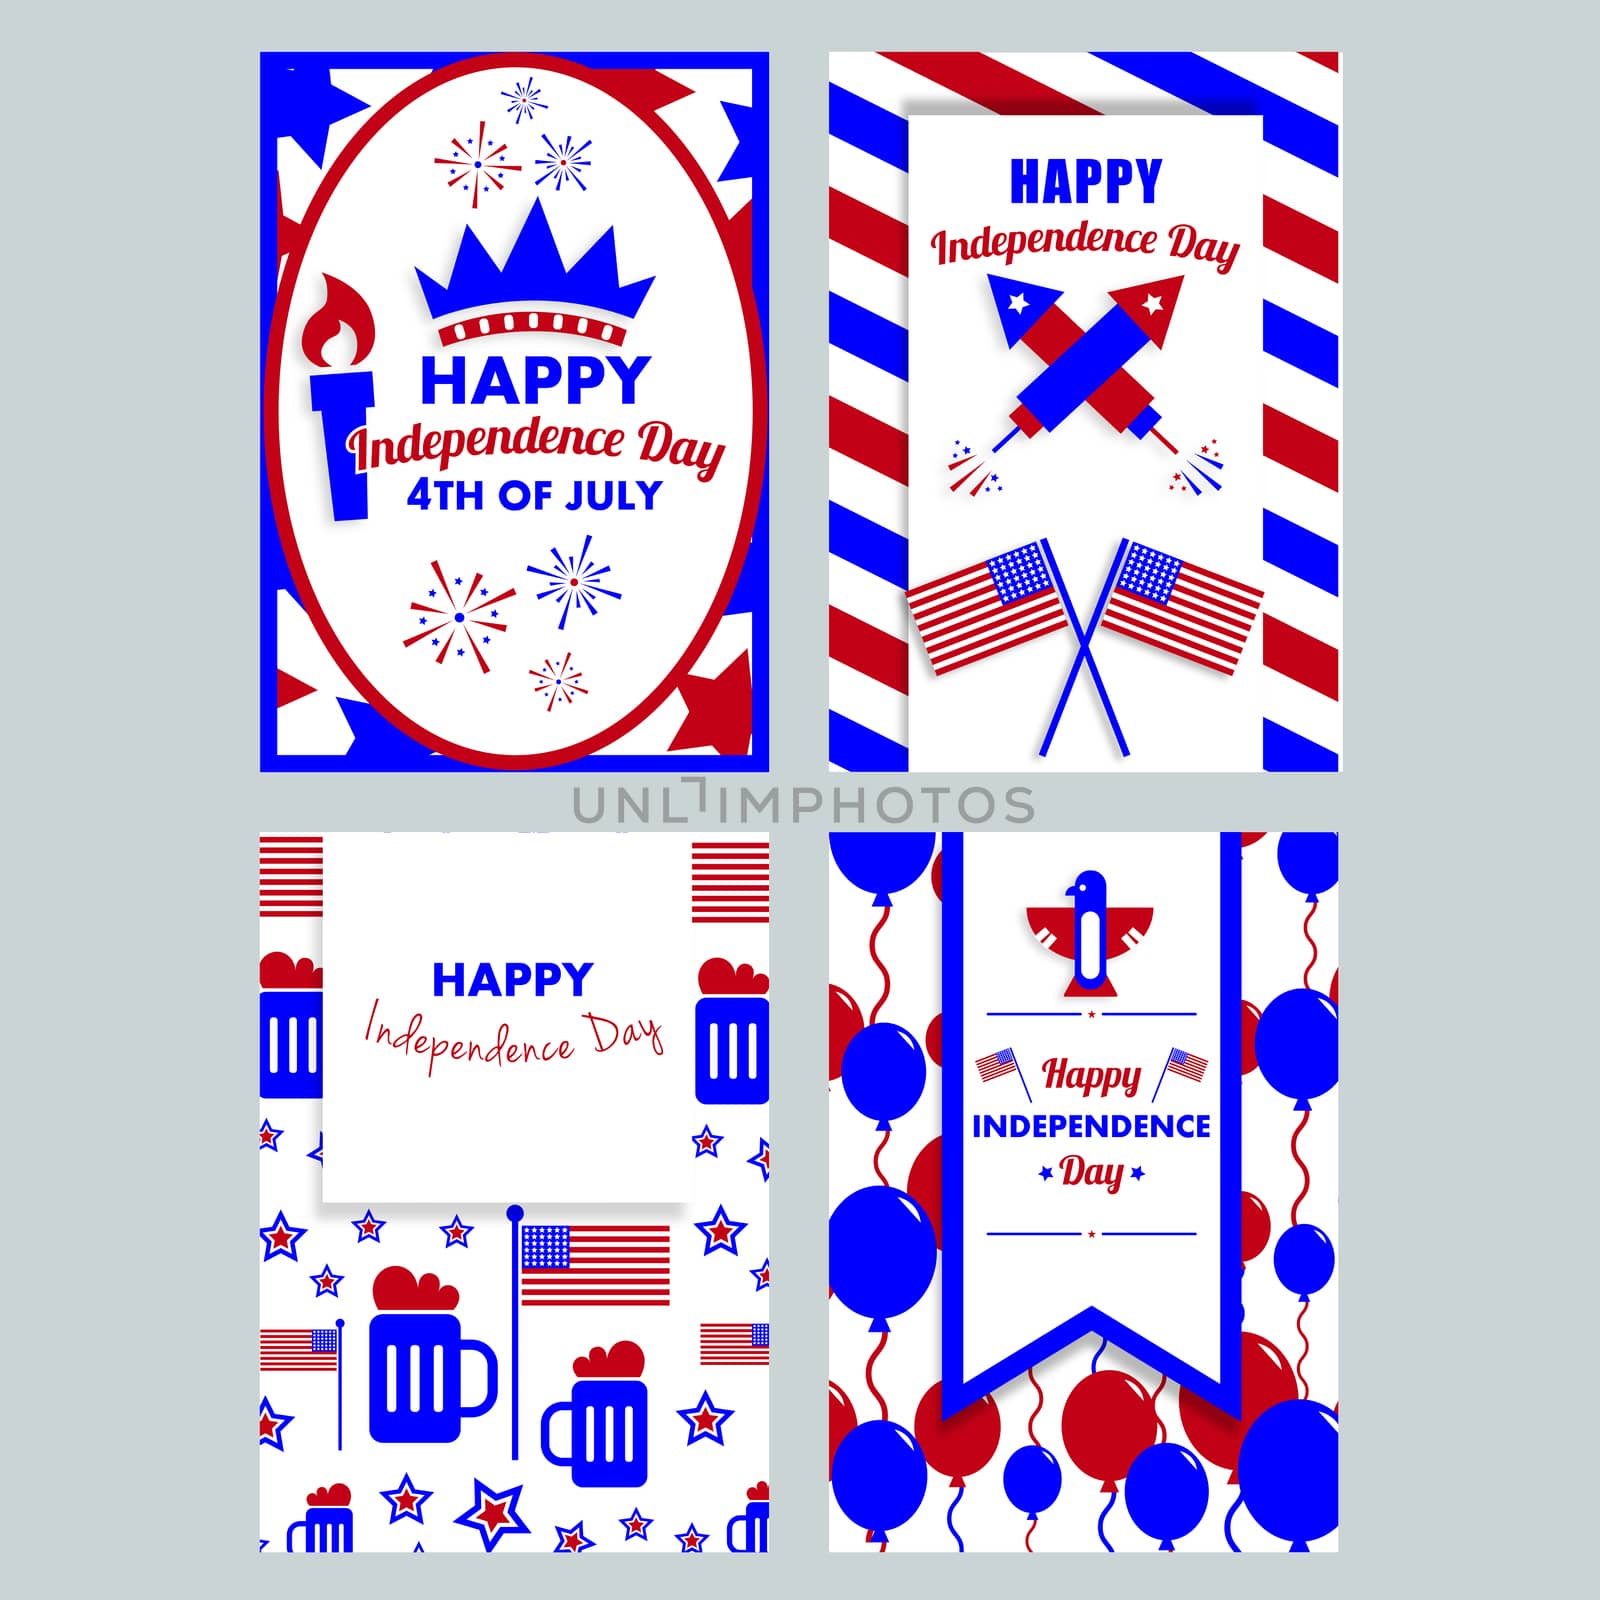 Card with happy independence day text against colored background